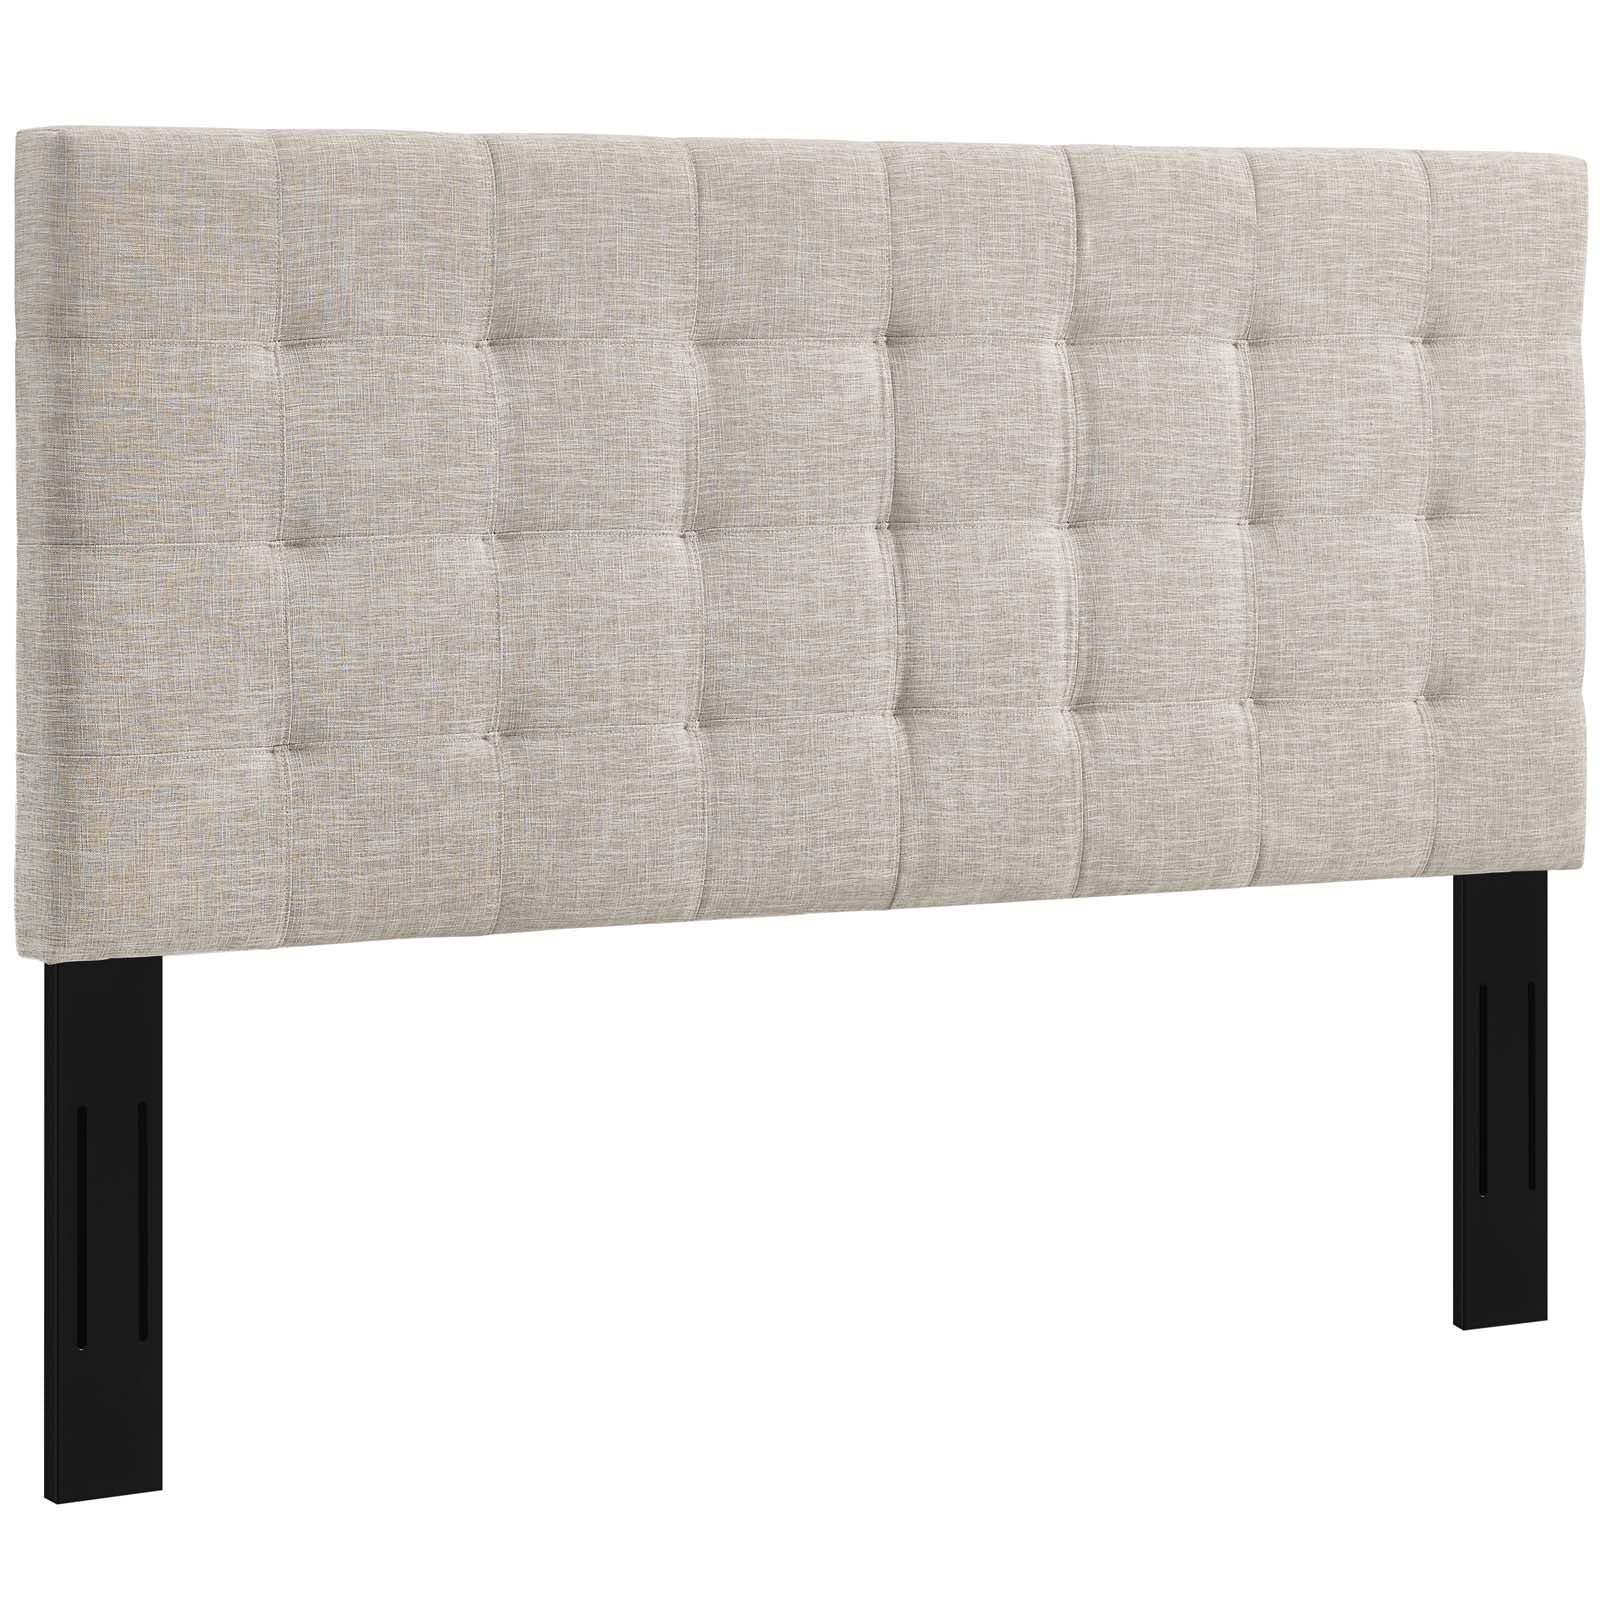 Paisley Tufted King and California King Upholstered Linen Fabric Headboard - East Shore Modern Home Furnishings